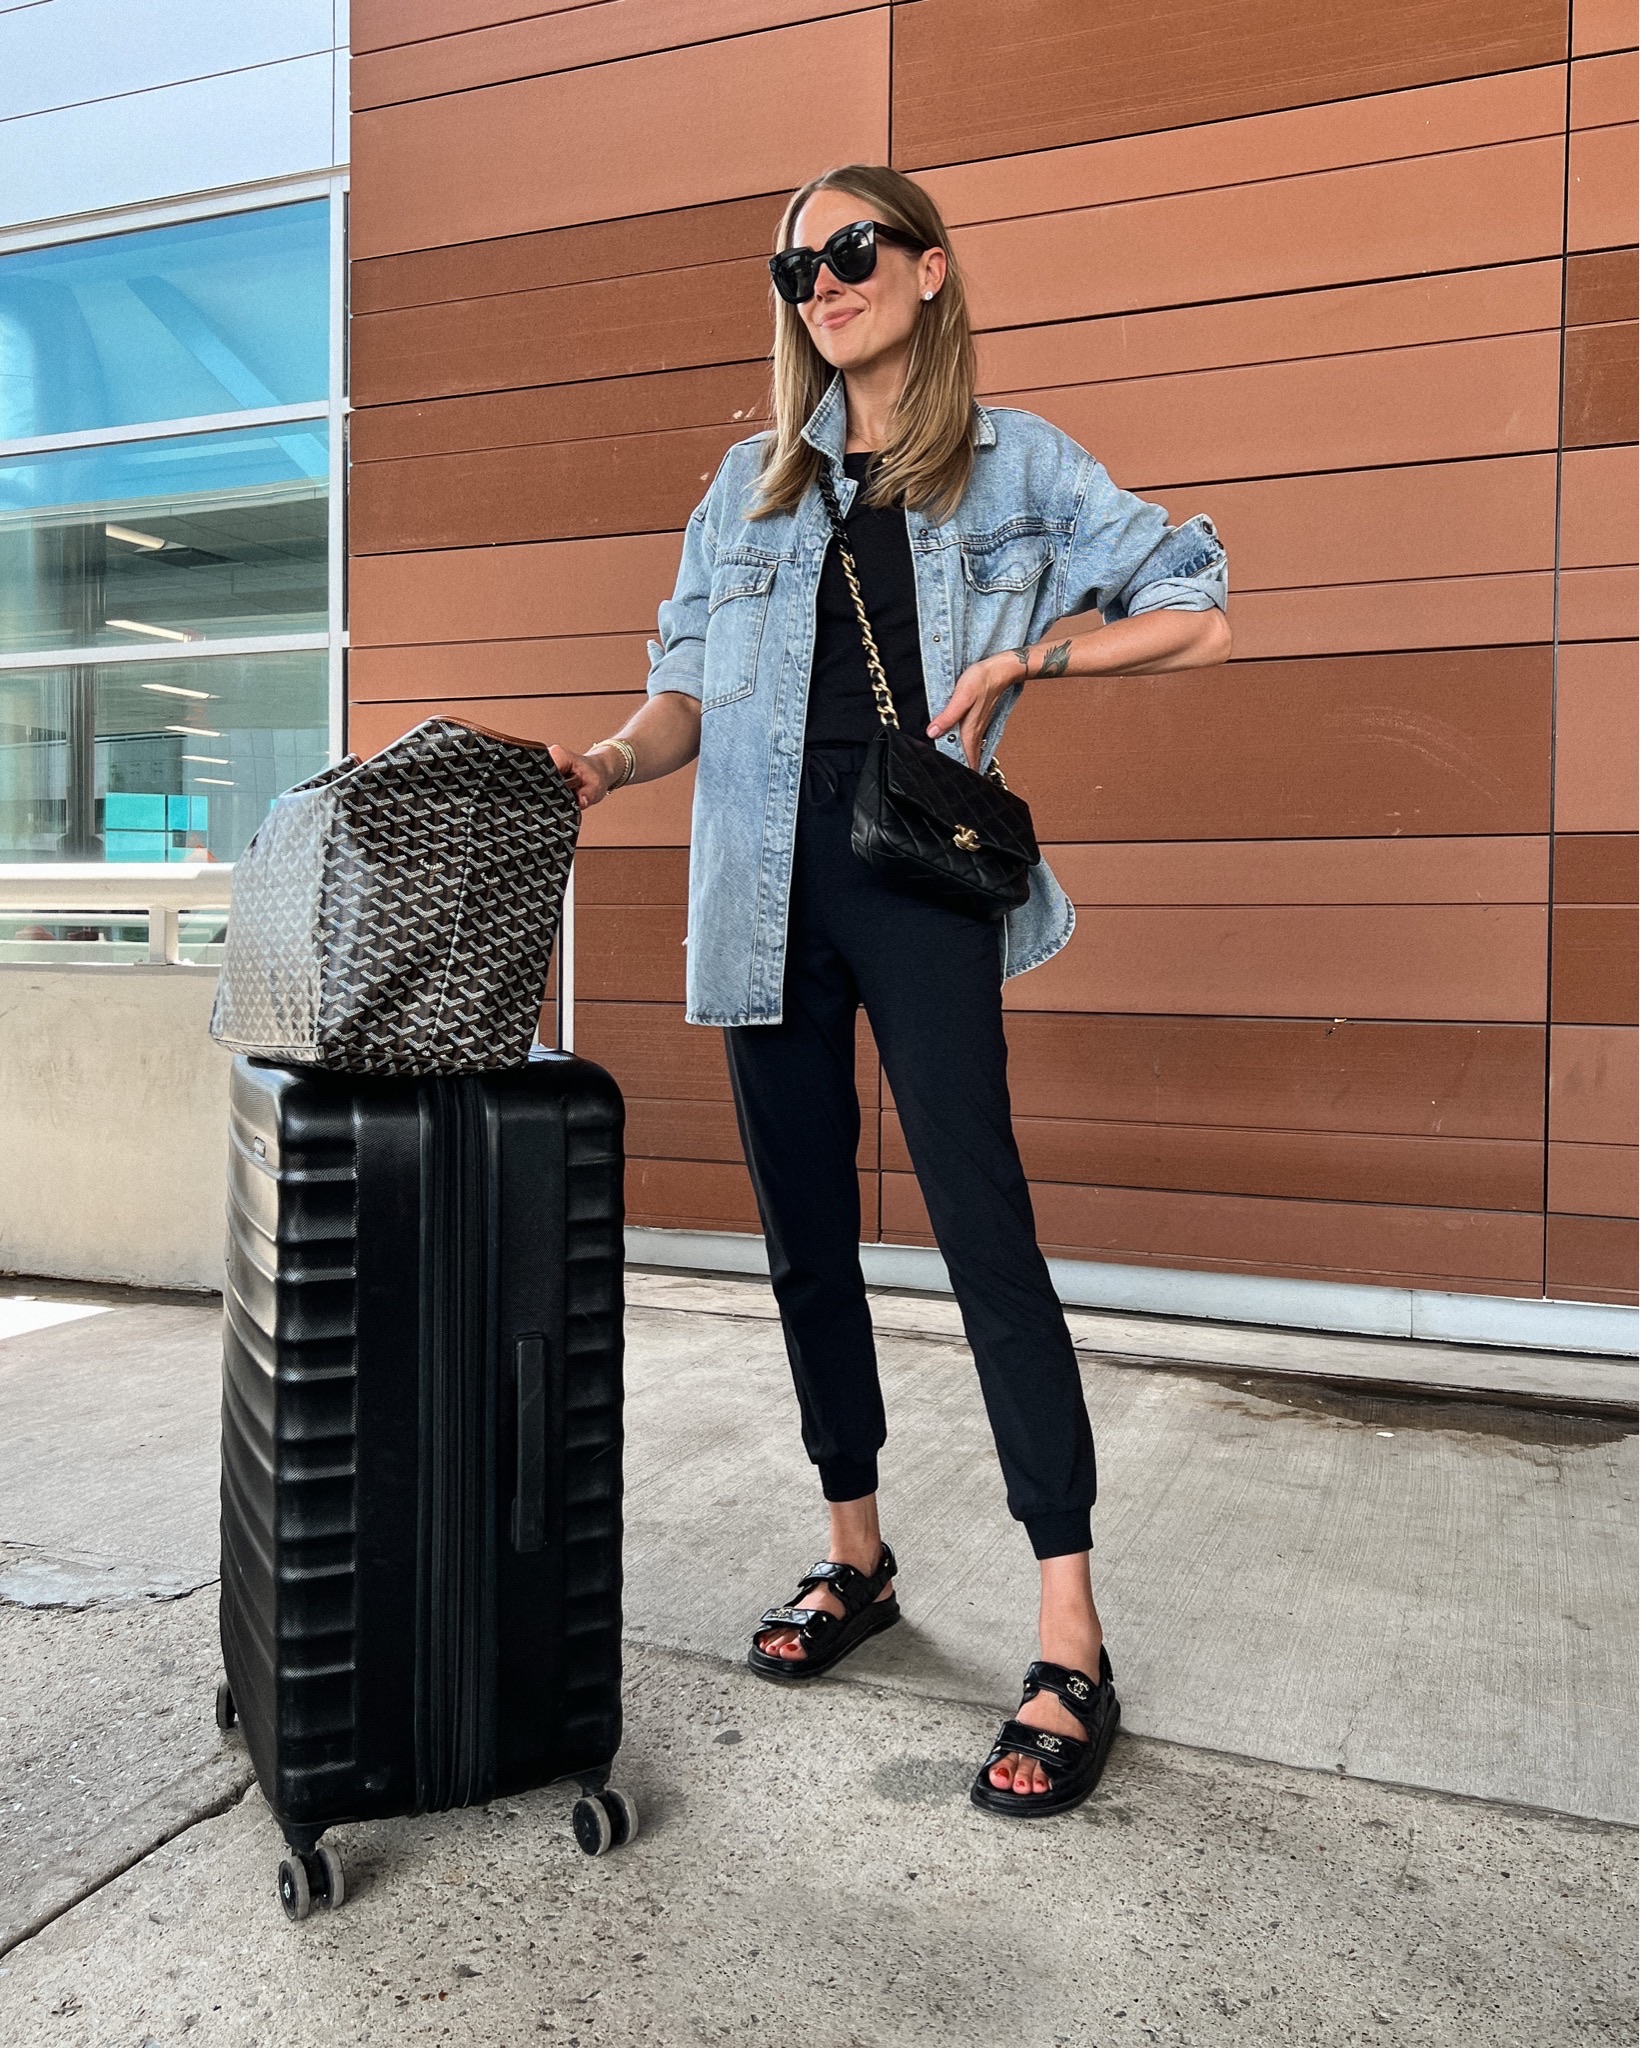 Smart But Still Cute: 5 Travel-Ready Airport Outfits - The Mom Edit